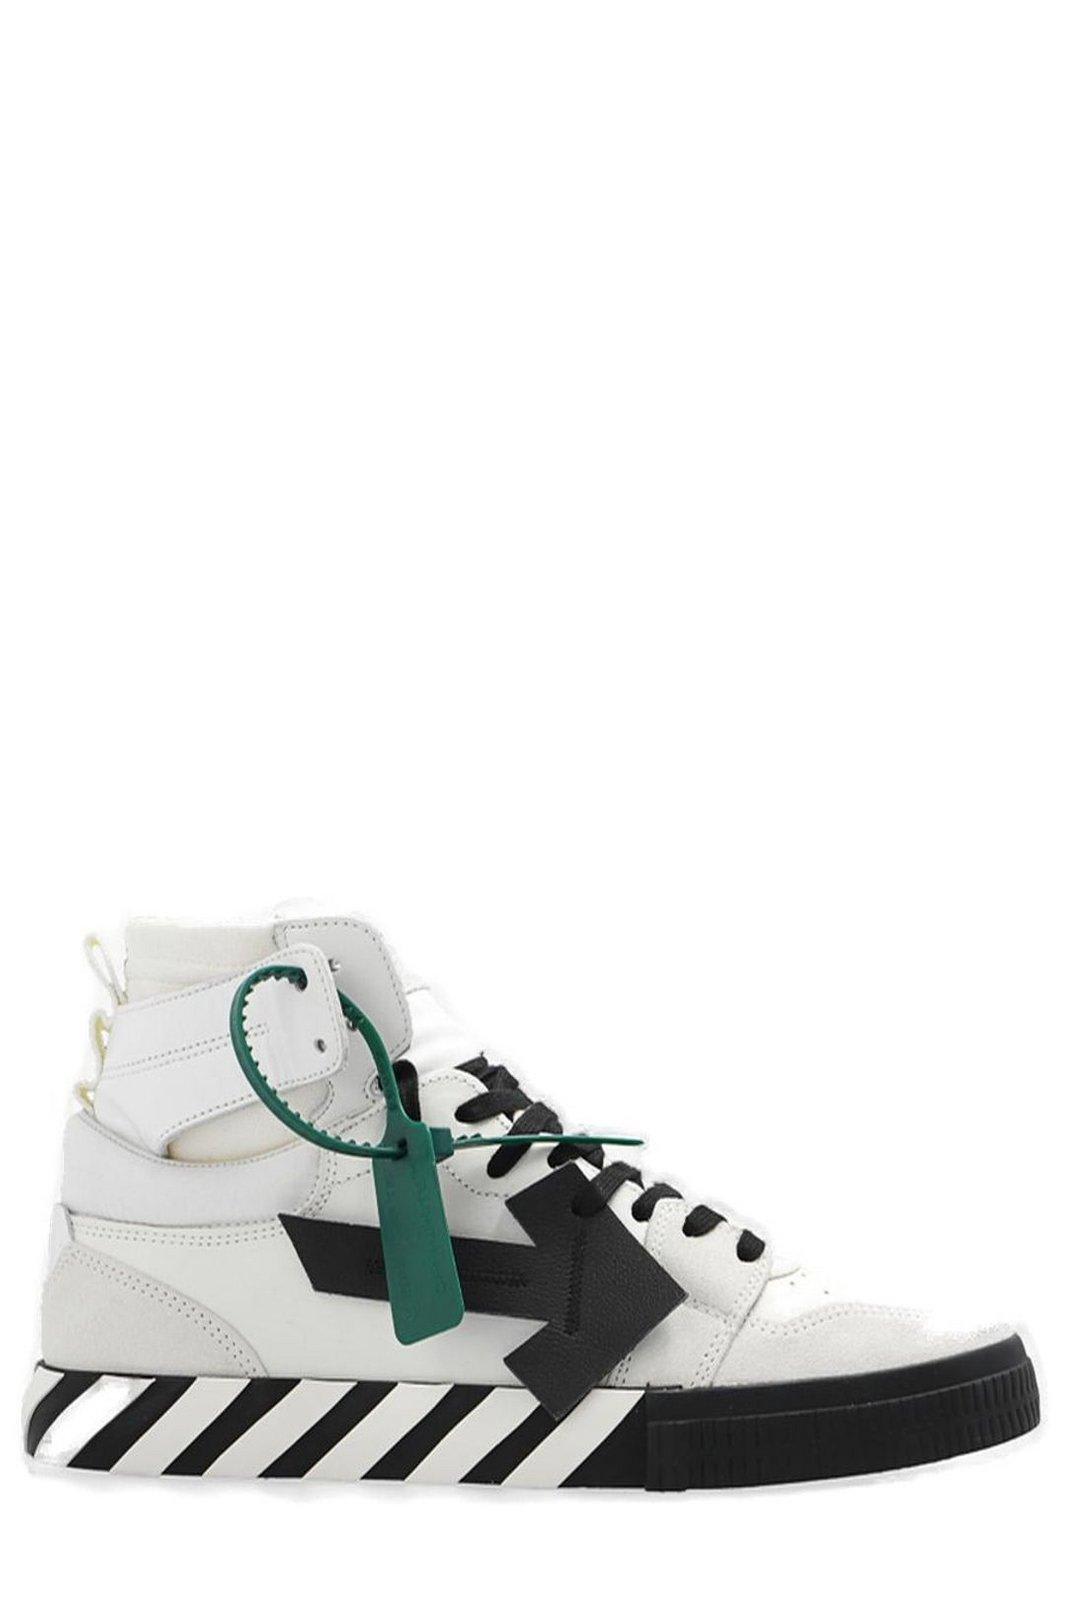 OFF-WHITE VULCANIZED HIGH-TOP LACED SNEAKERS